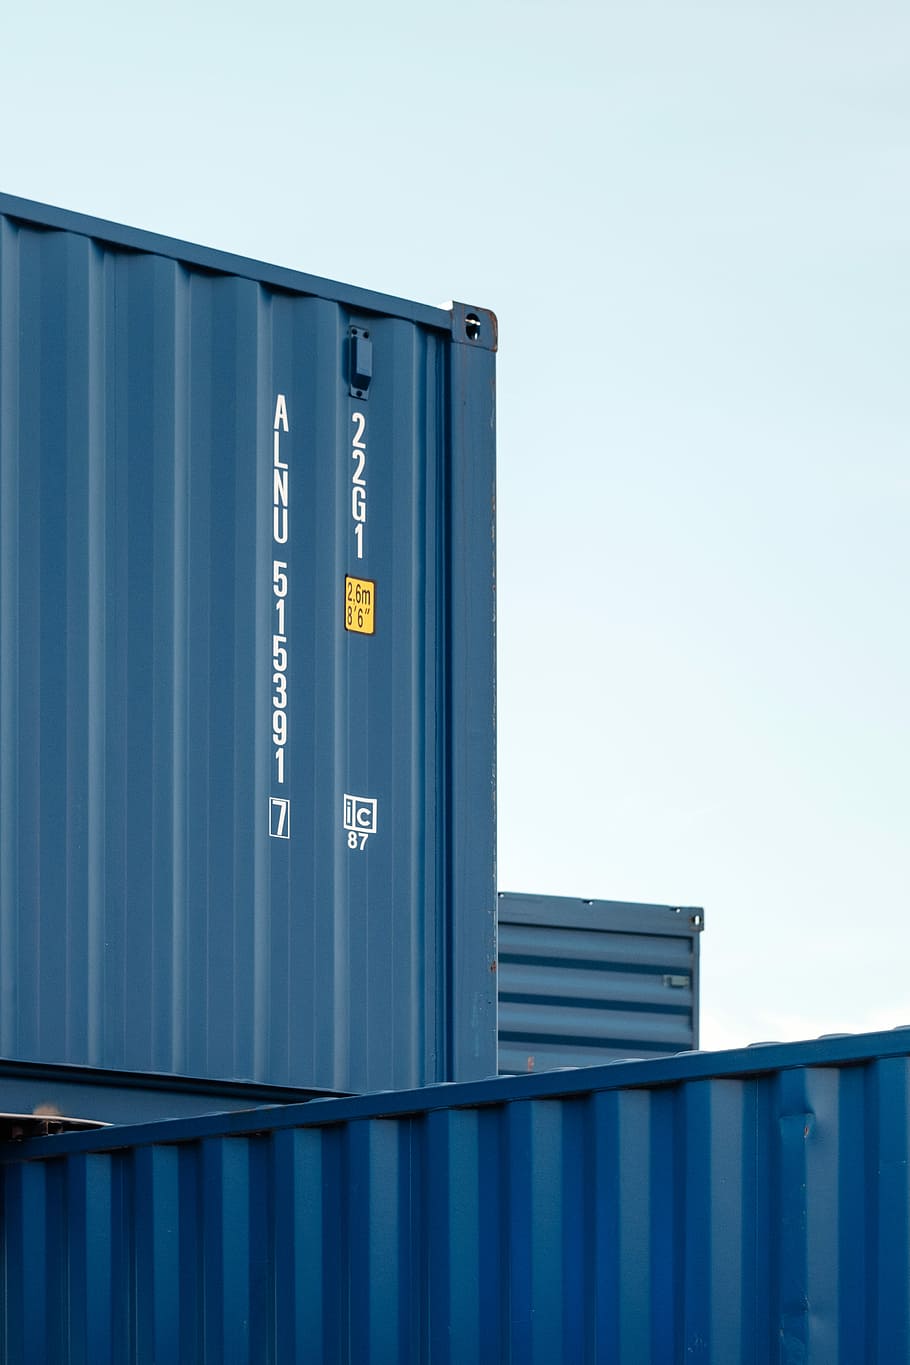 black cargo tanks piled up, gray intermodal containers stacking together under clear blue sky, HD wallpaper